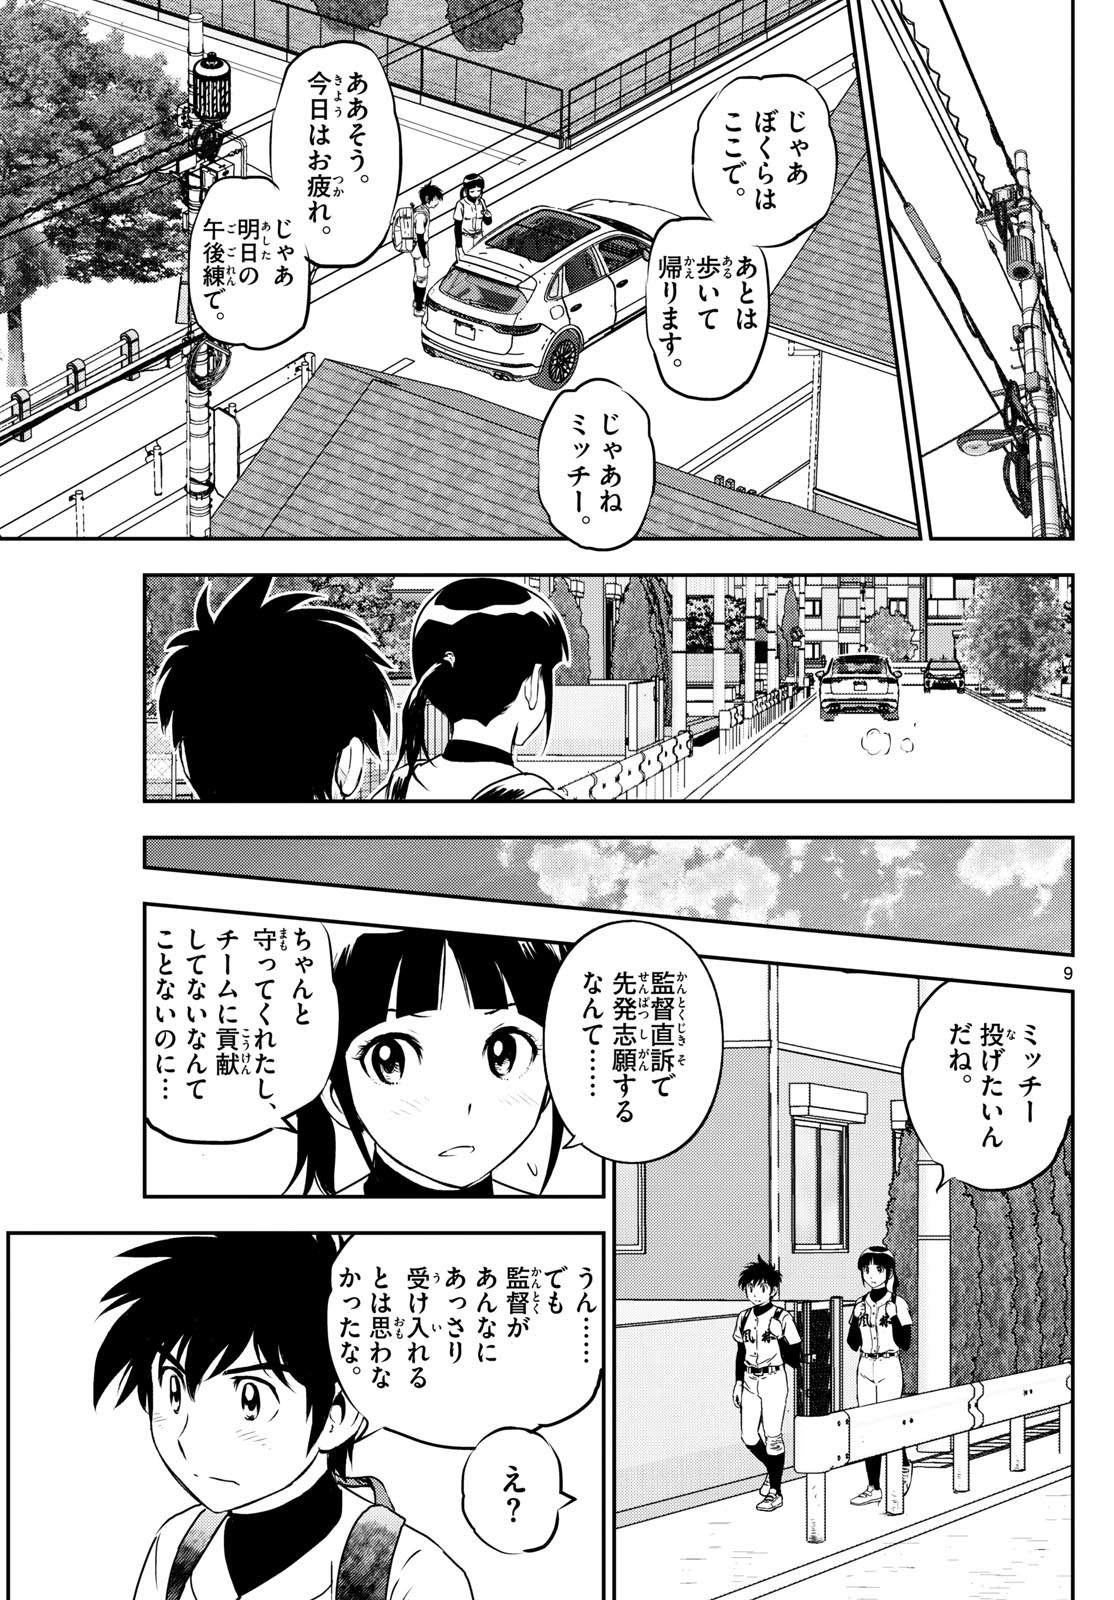 Major 2nd - メジャーセカンド - Chapter 278 - Page 9